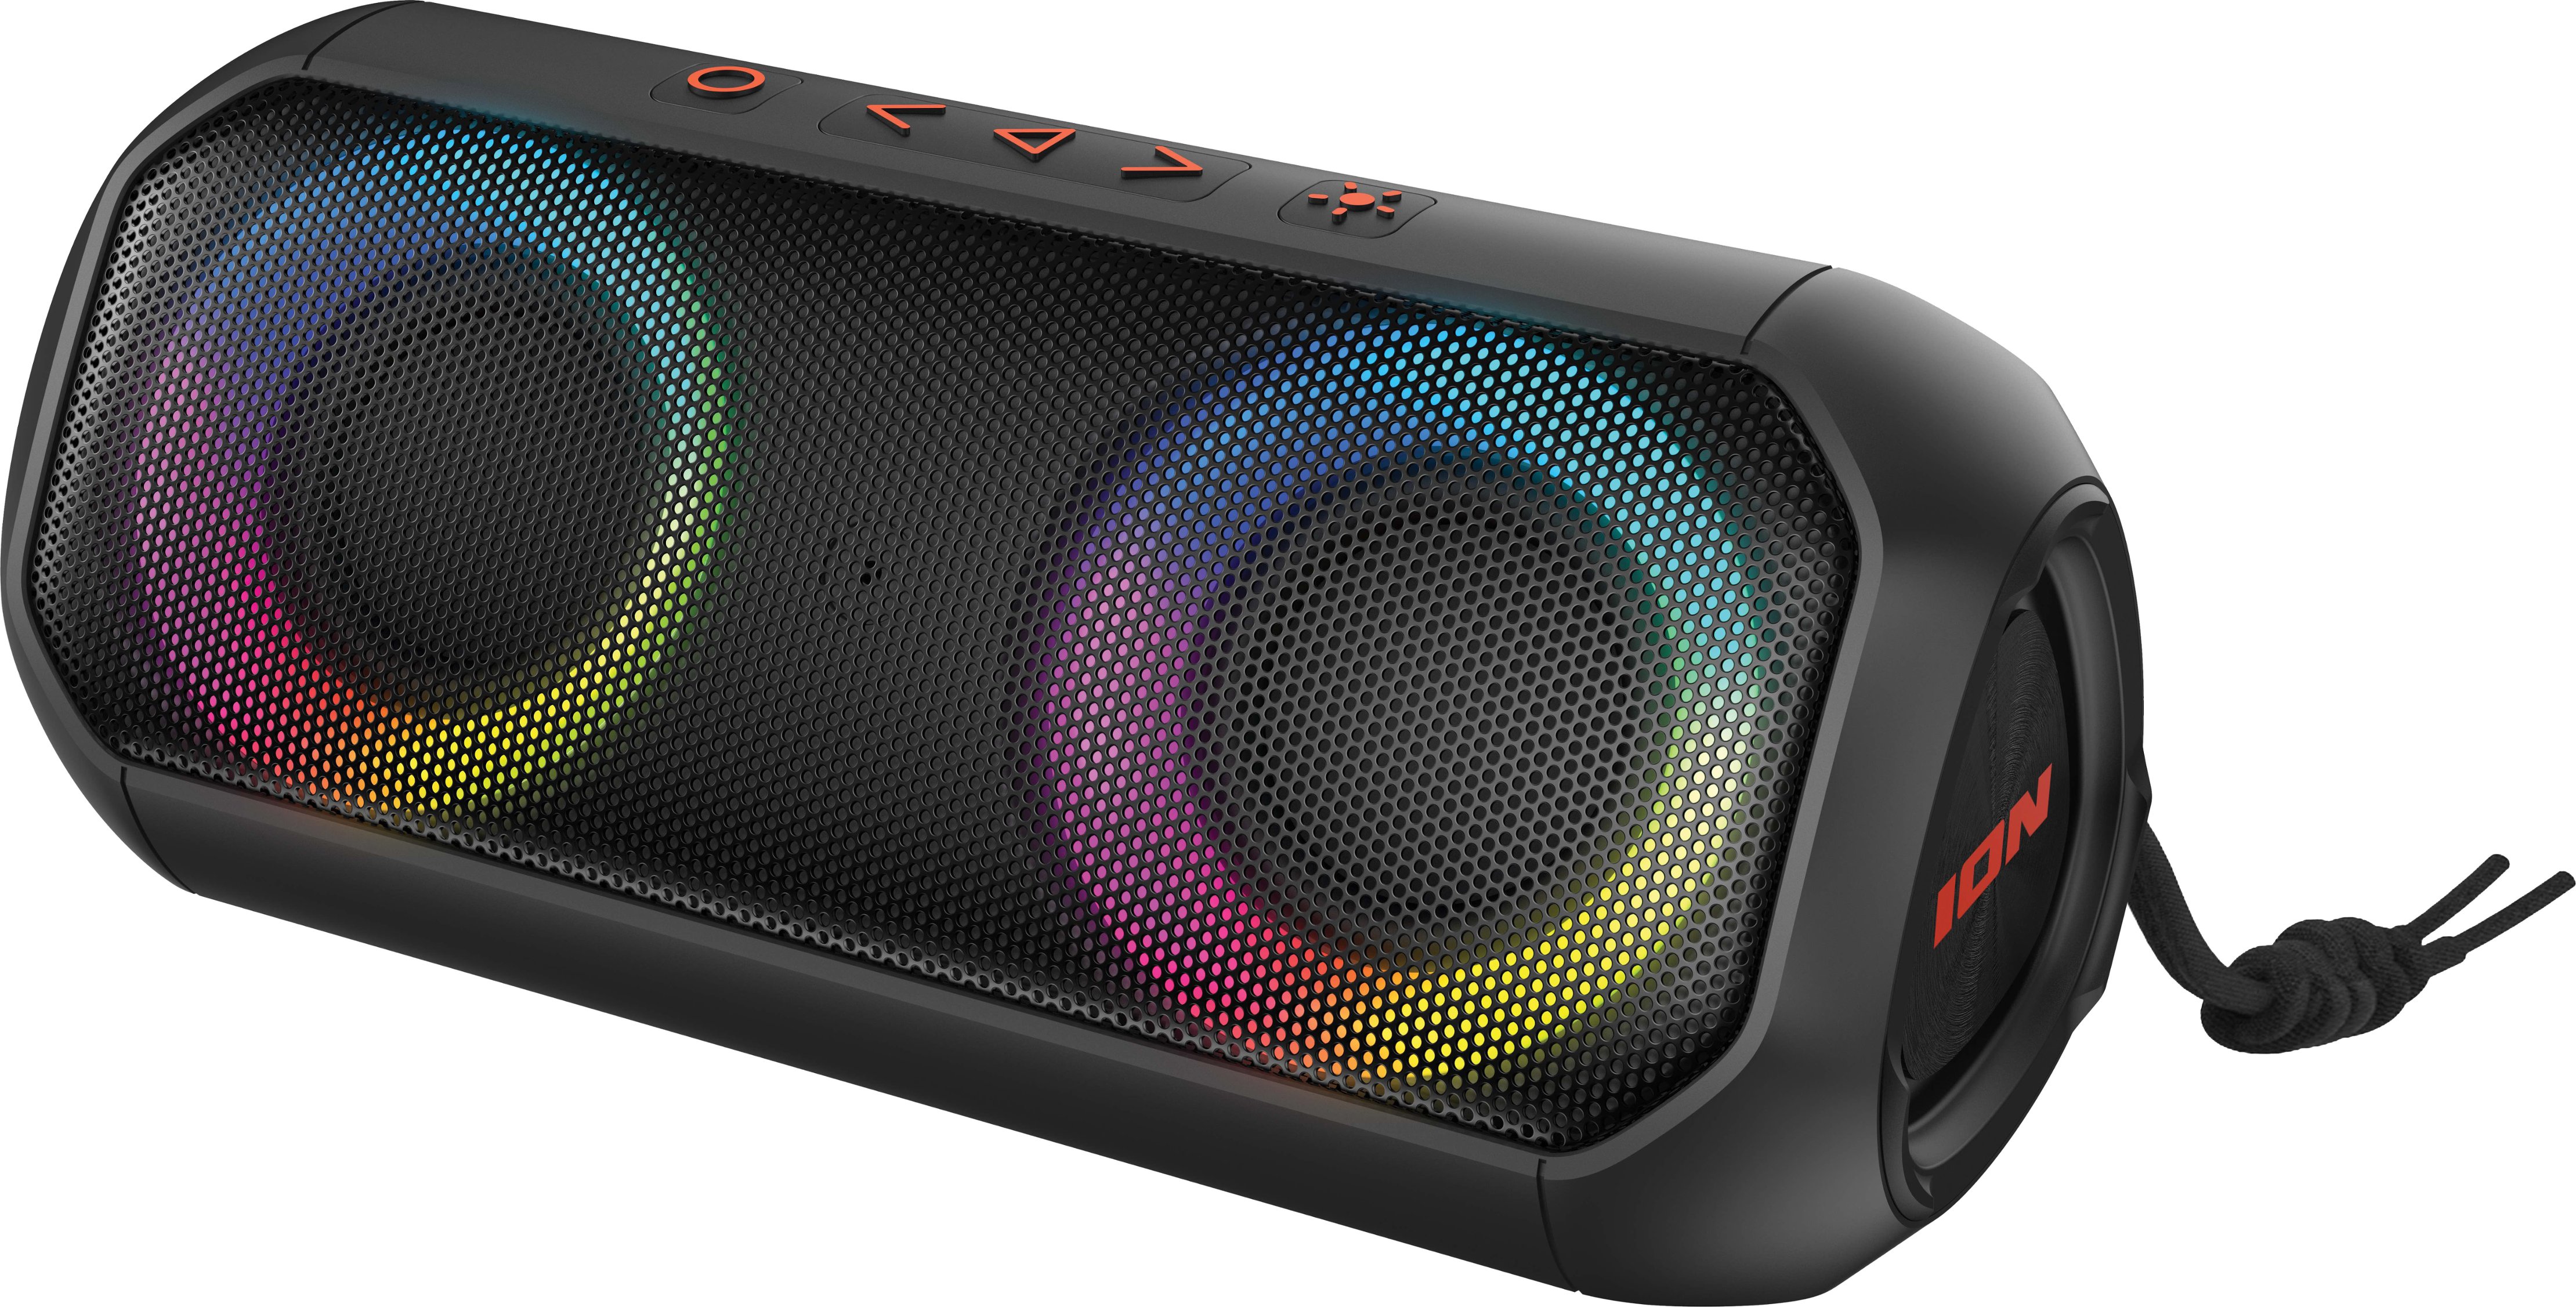 ION Audio and Microphone 40W LED with Speaker Boom UBERBOOMXUS Buy Bluetooth Built-In All-Weather Portable Best Wireless - Lights Uber Multi-Colored Black